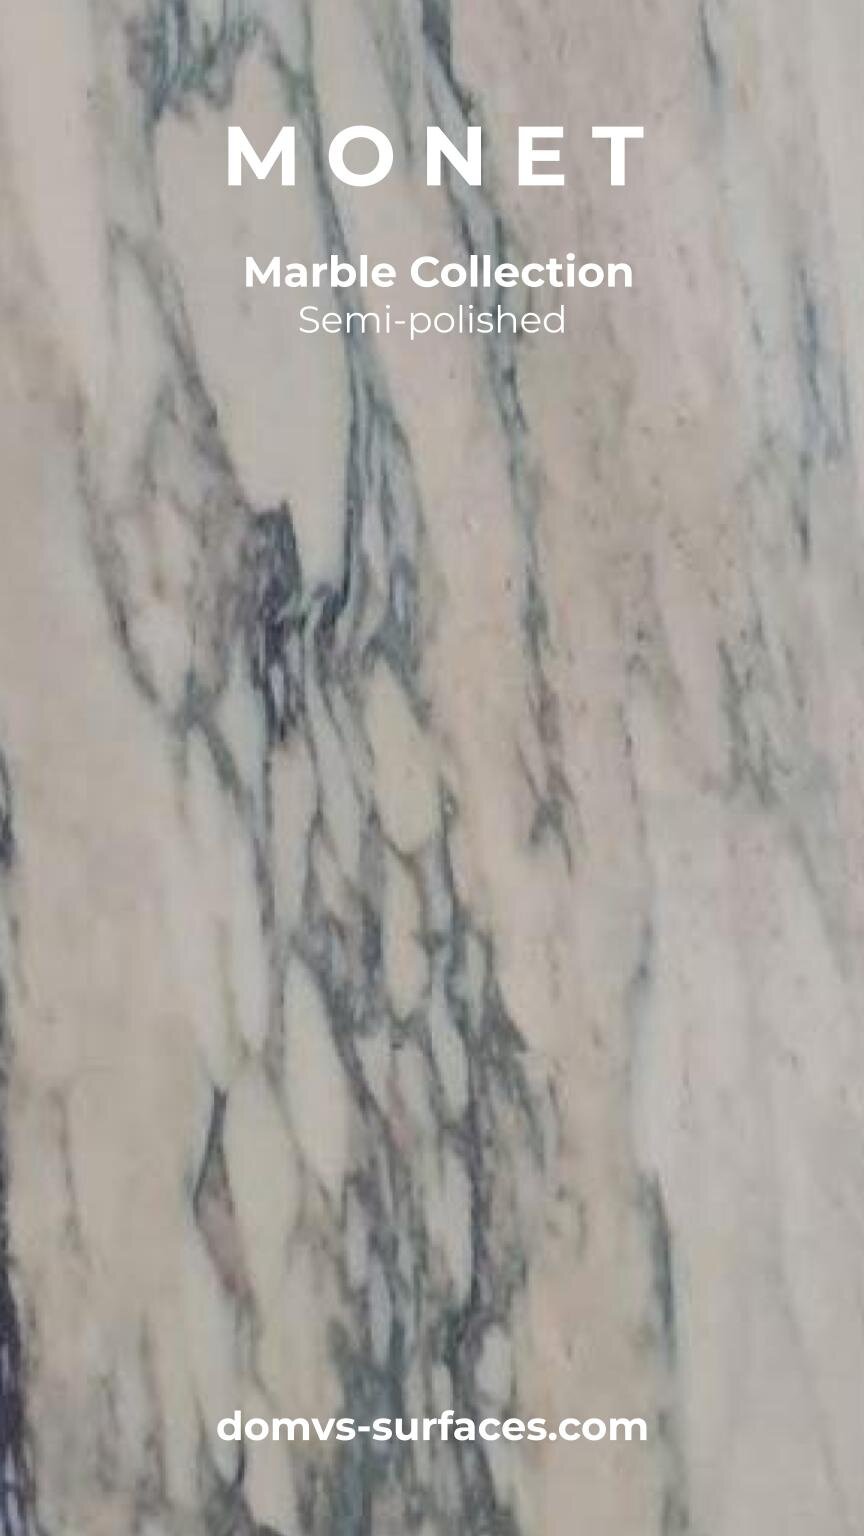 Monet Marble Collection.jpg